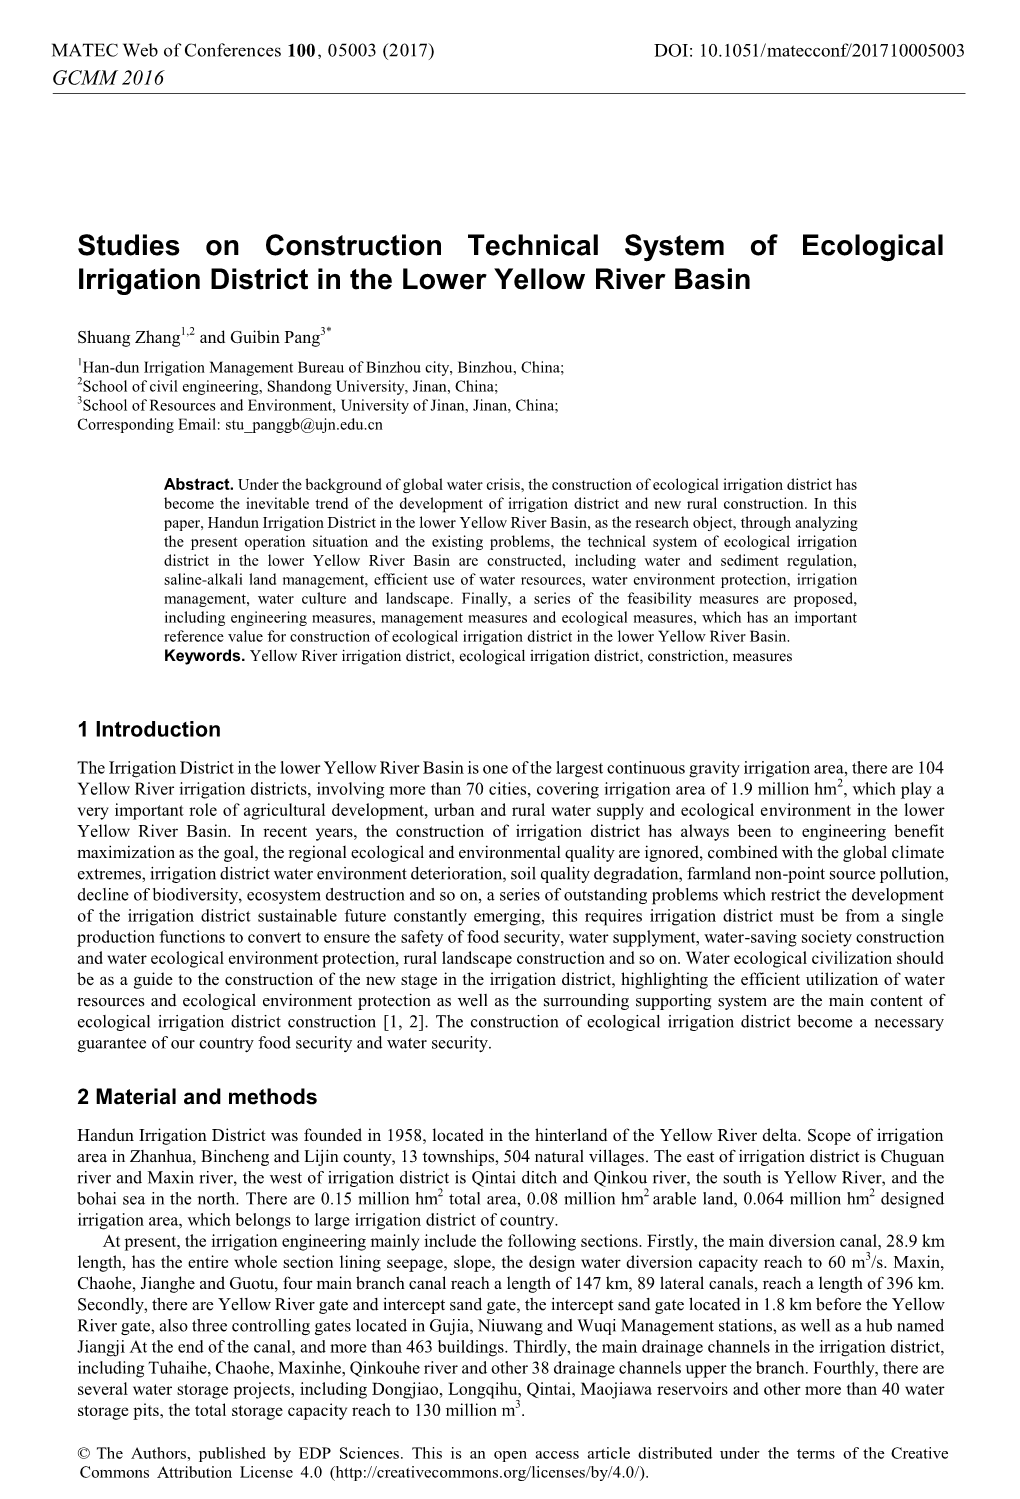 Studies on Construction Technical System of Ecological Irrigation District in the Lower Yellow River Basin